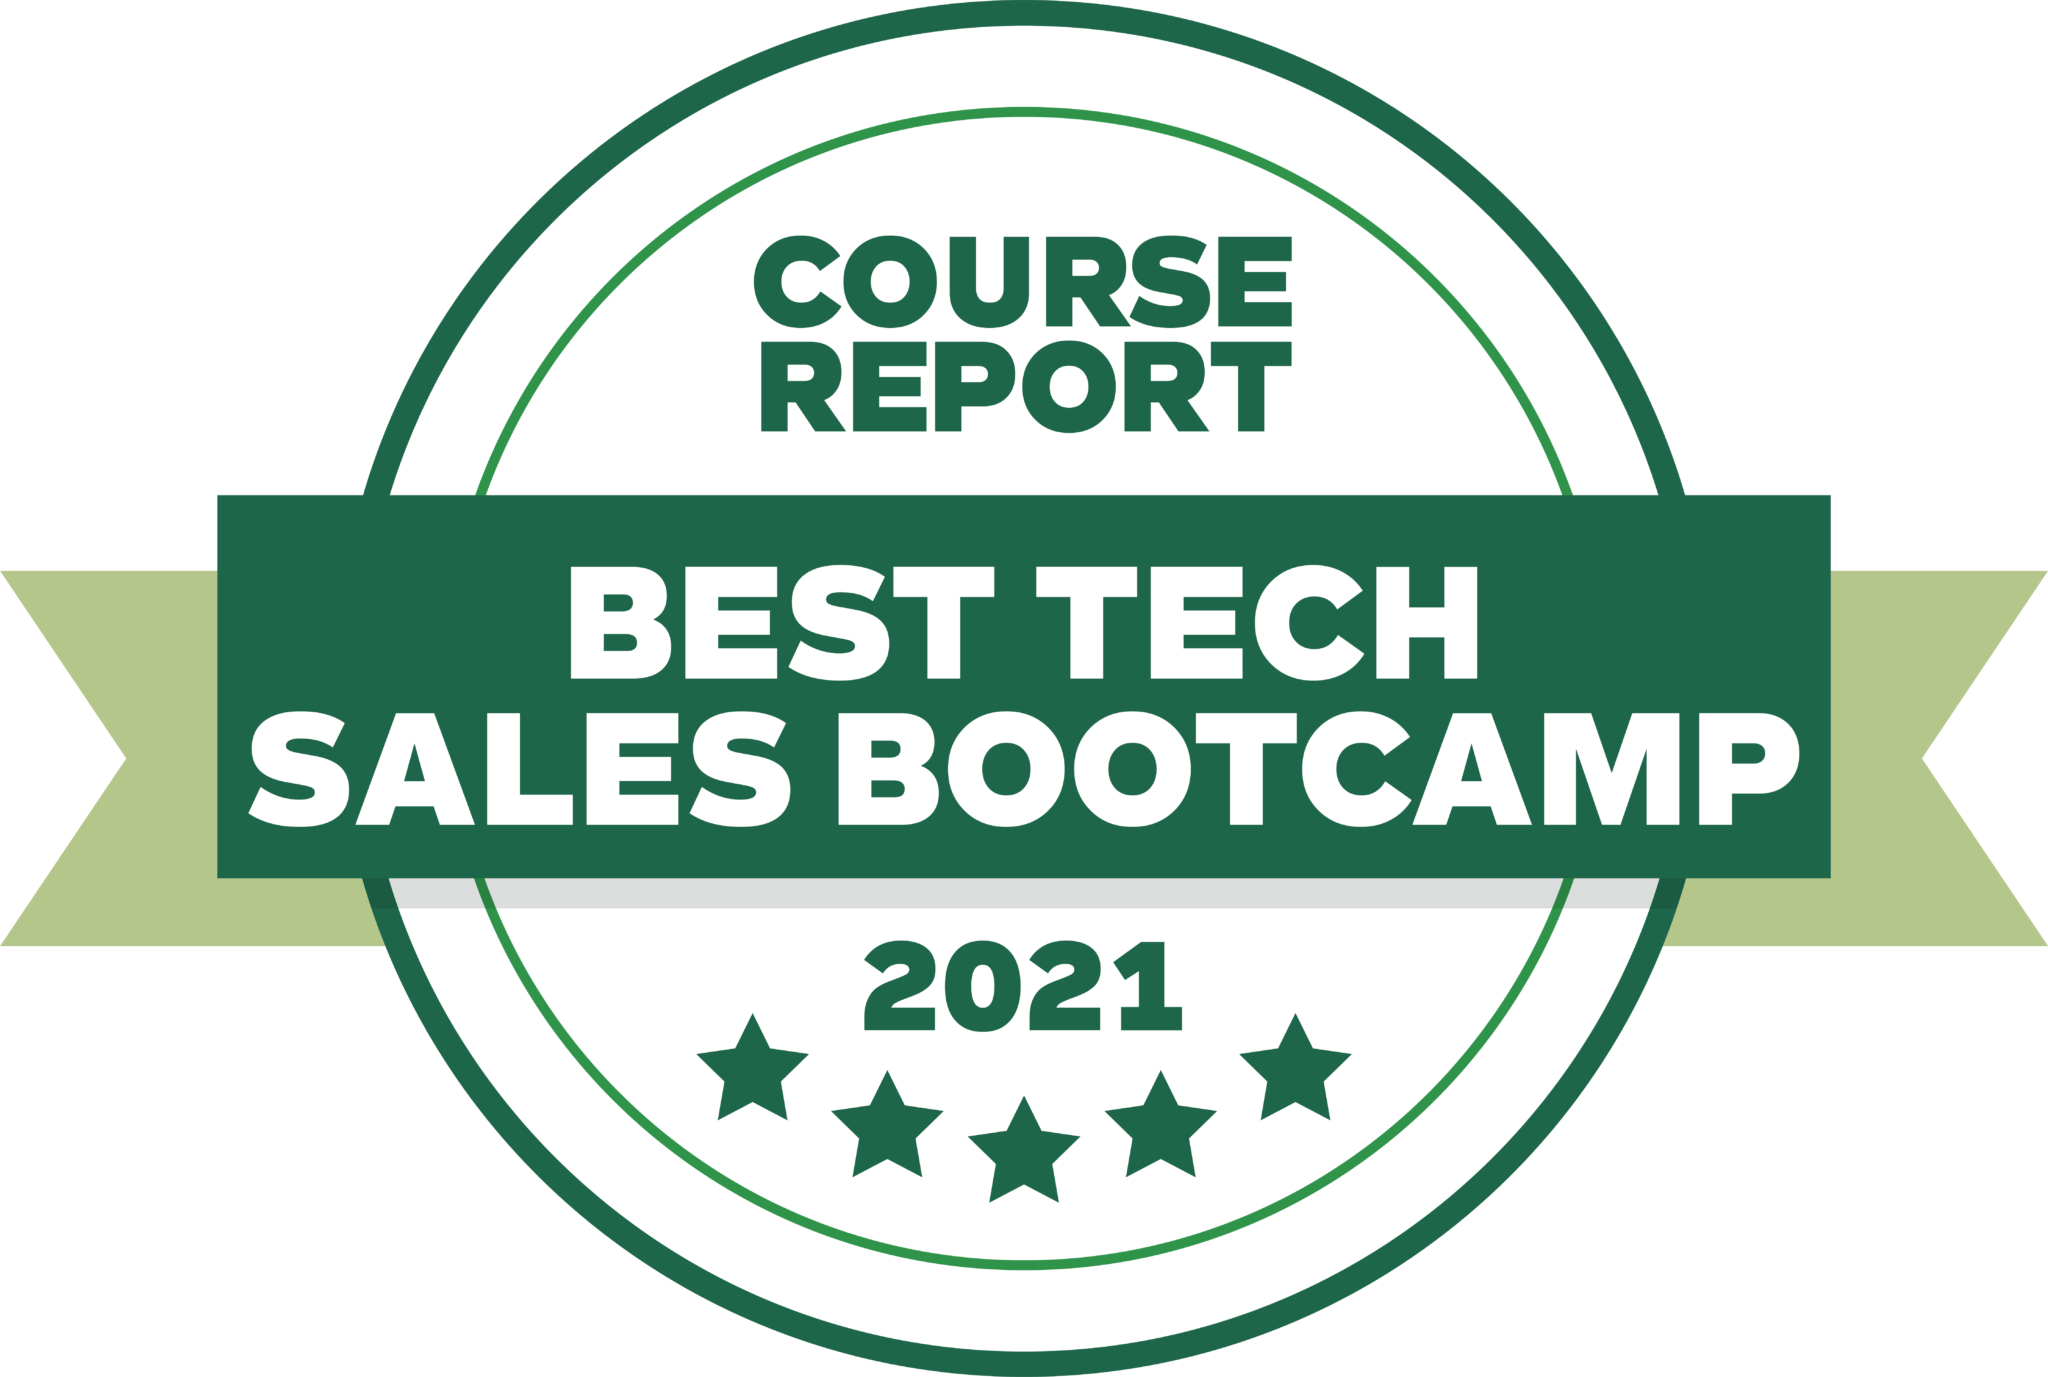 Best Technical Sales Bootcamp Badge Course Report